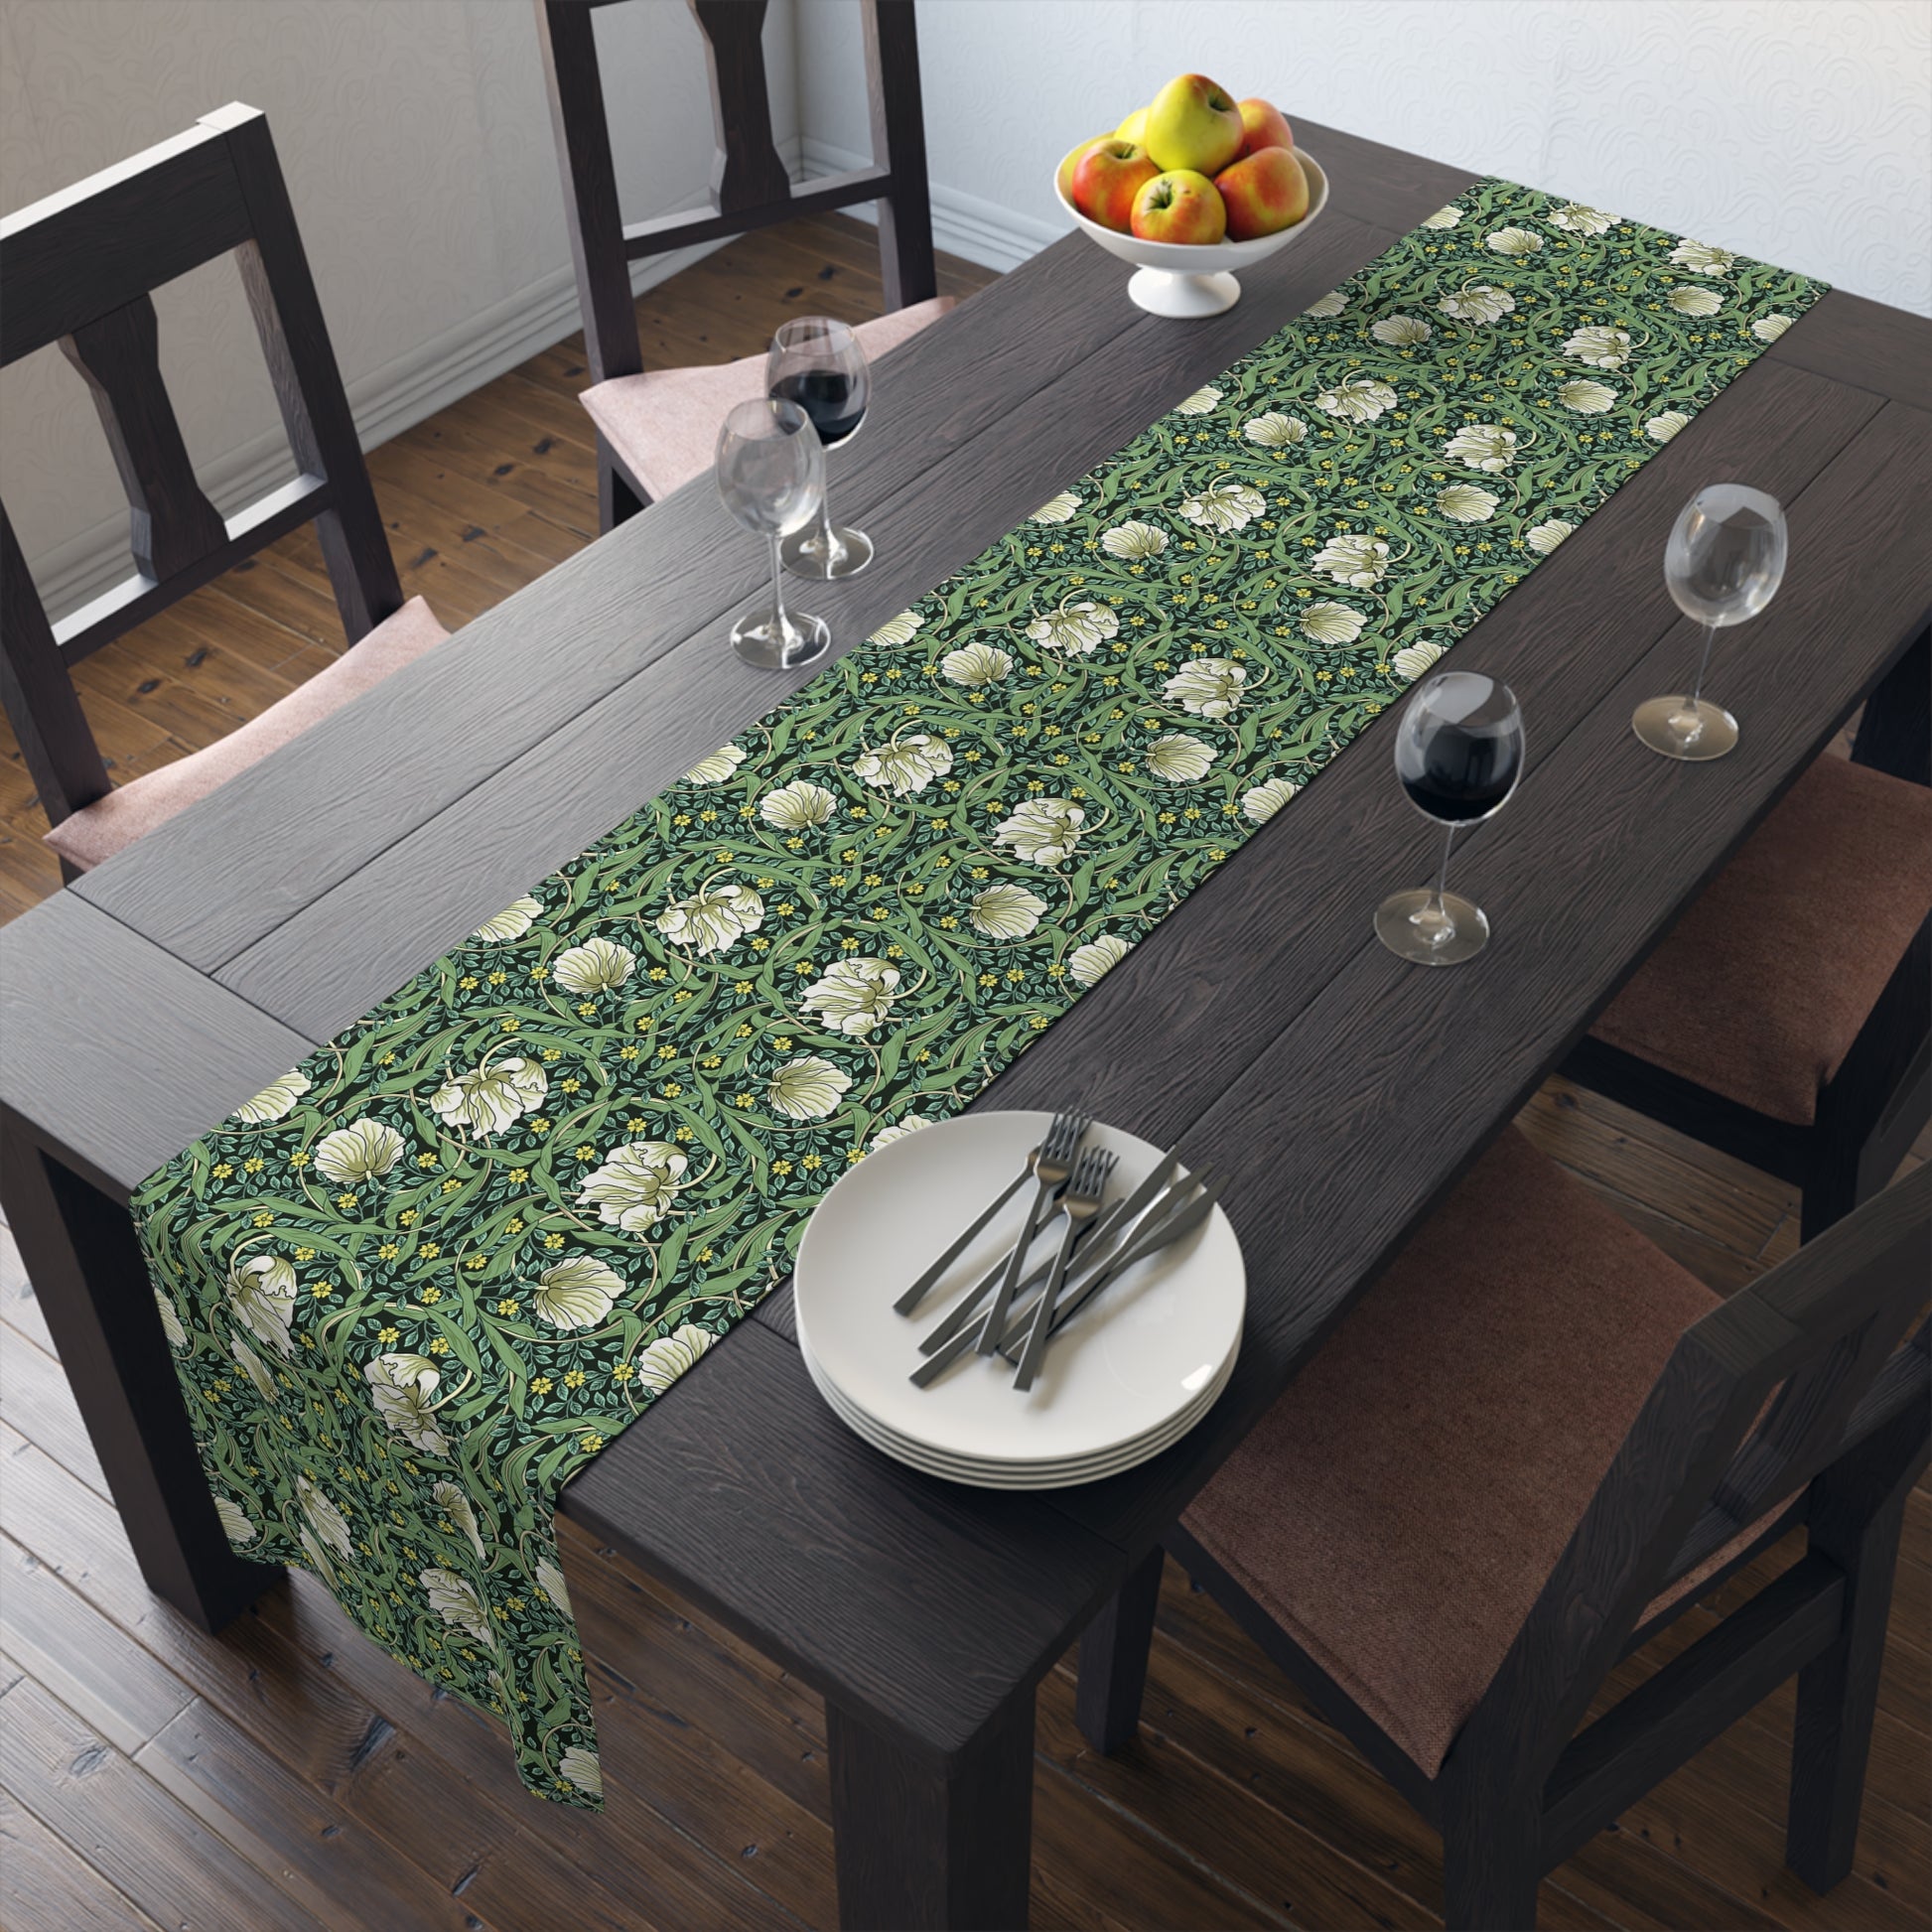 william-morris-co-table-runner-pimpernel-collection-green-6